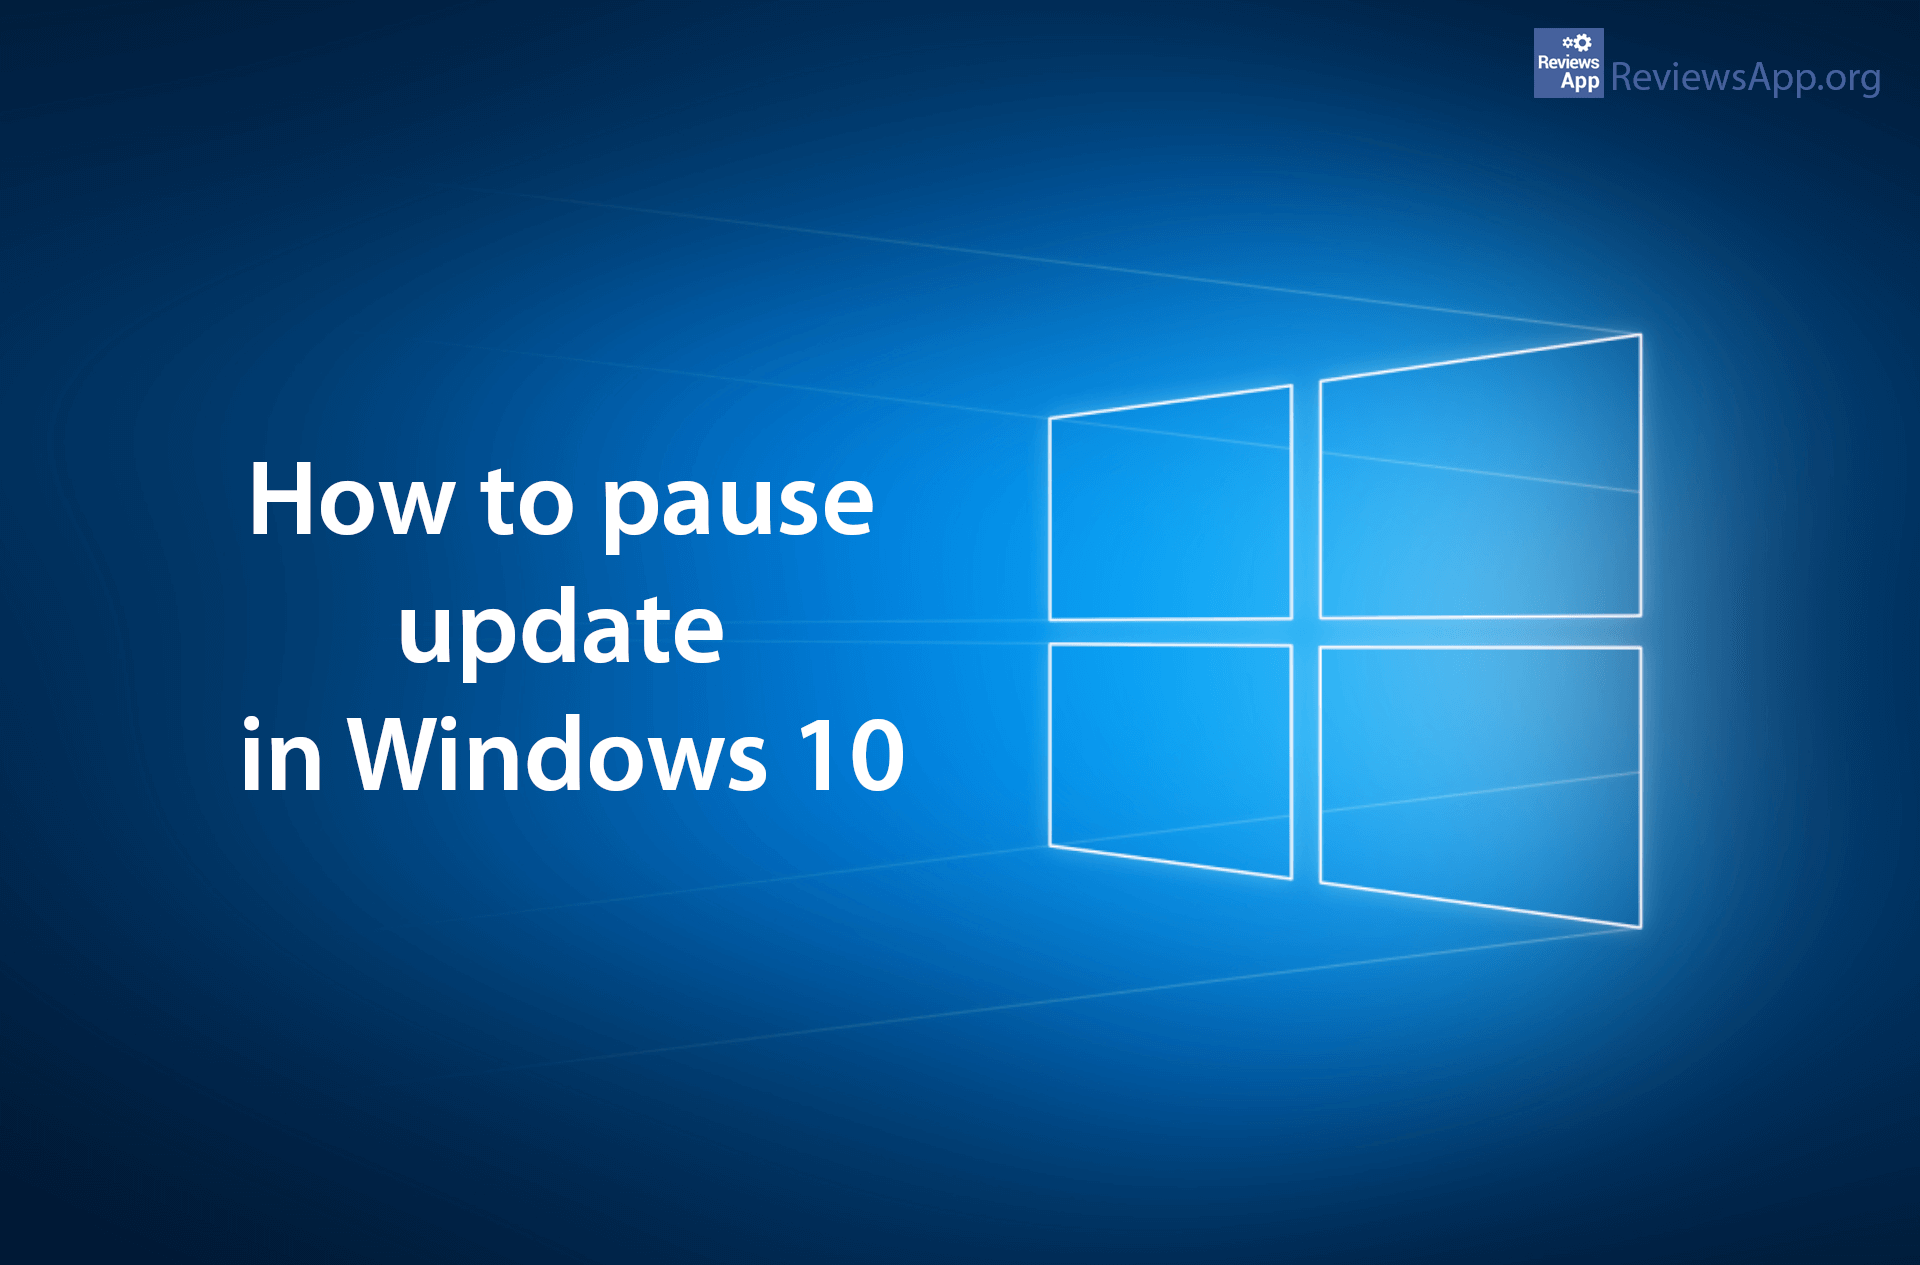 How to pause update in Windows 10